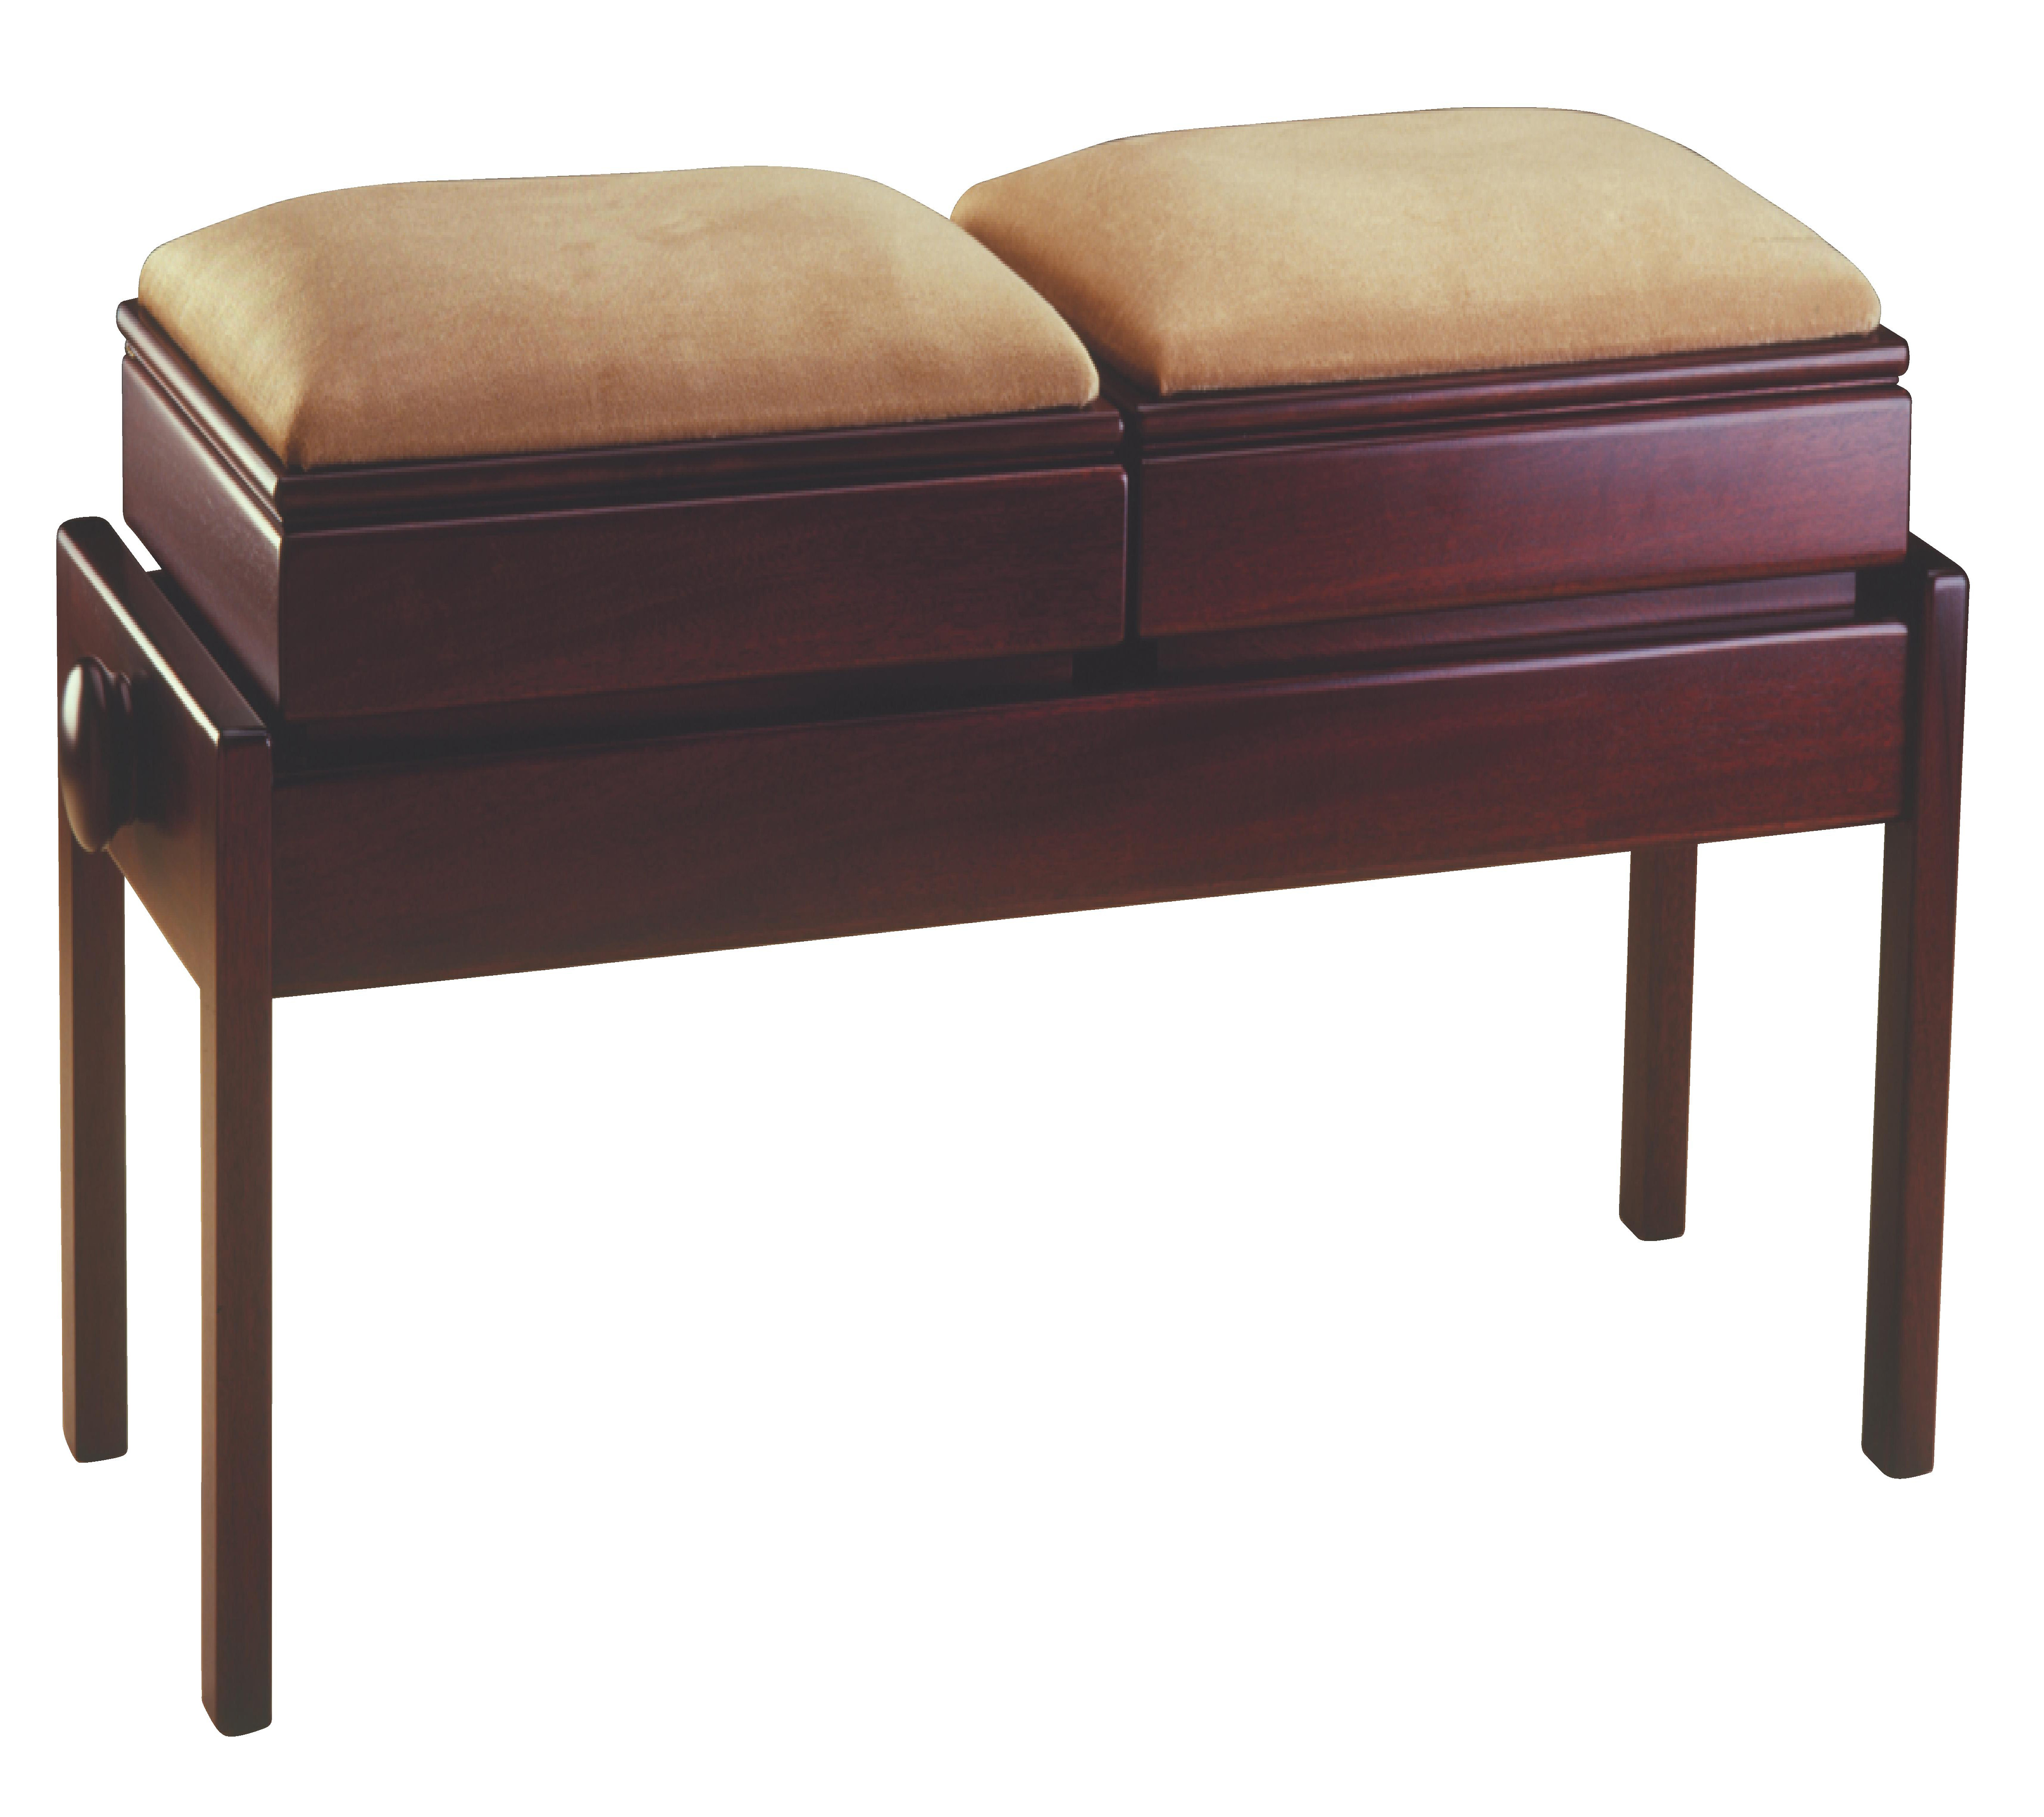 Walnut Genuine Leather Concert Grand Duet Piano Bench Stool with Music Storage 